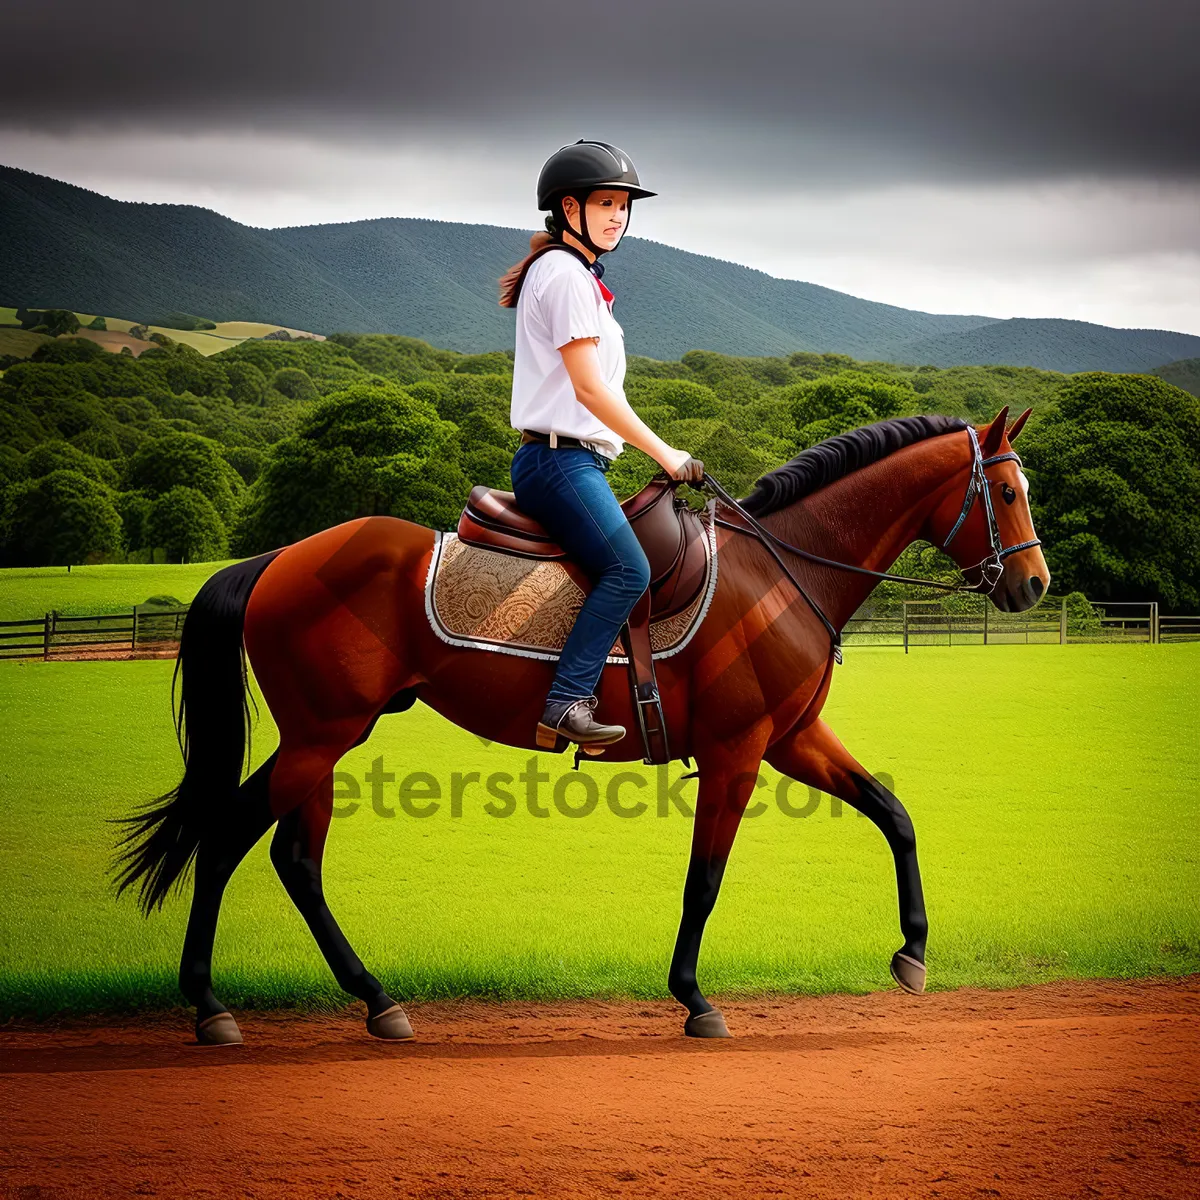 Picture of Majestic stallion in equestrian field with jockey.